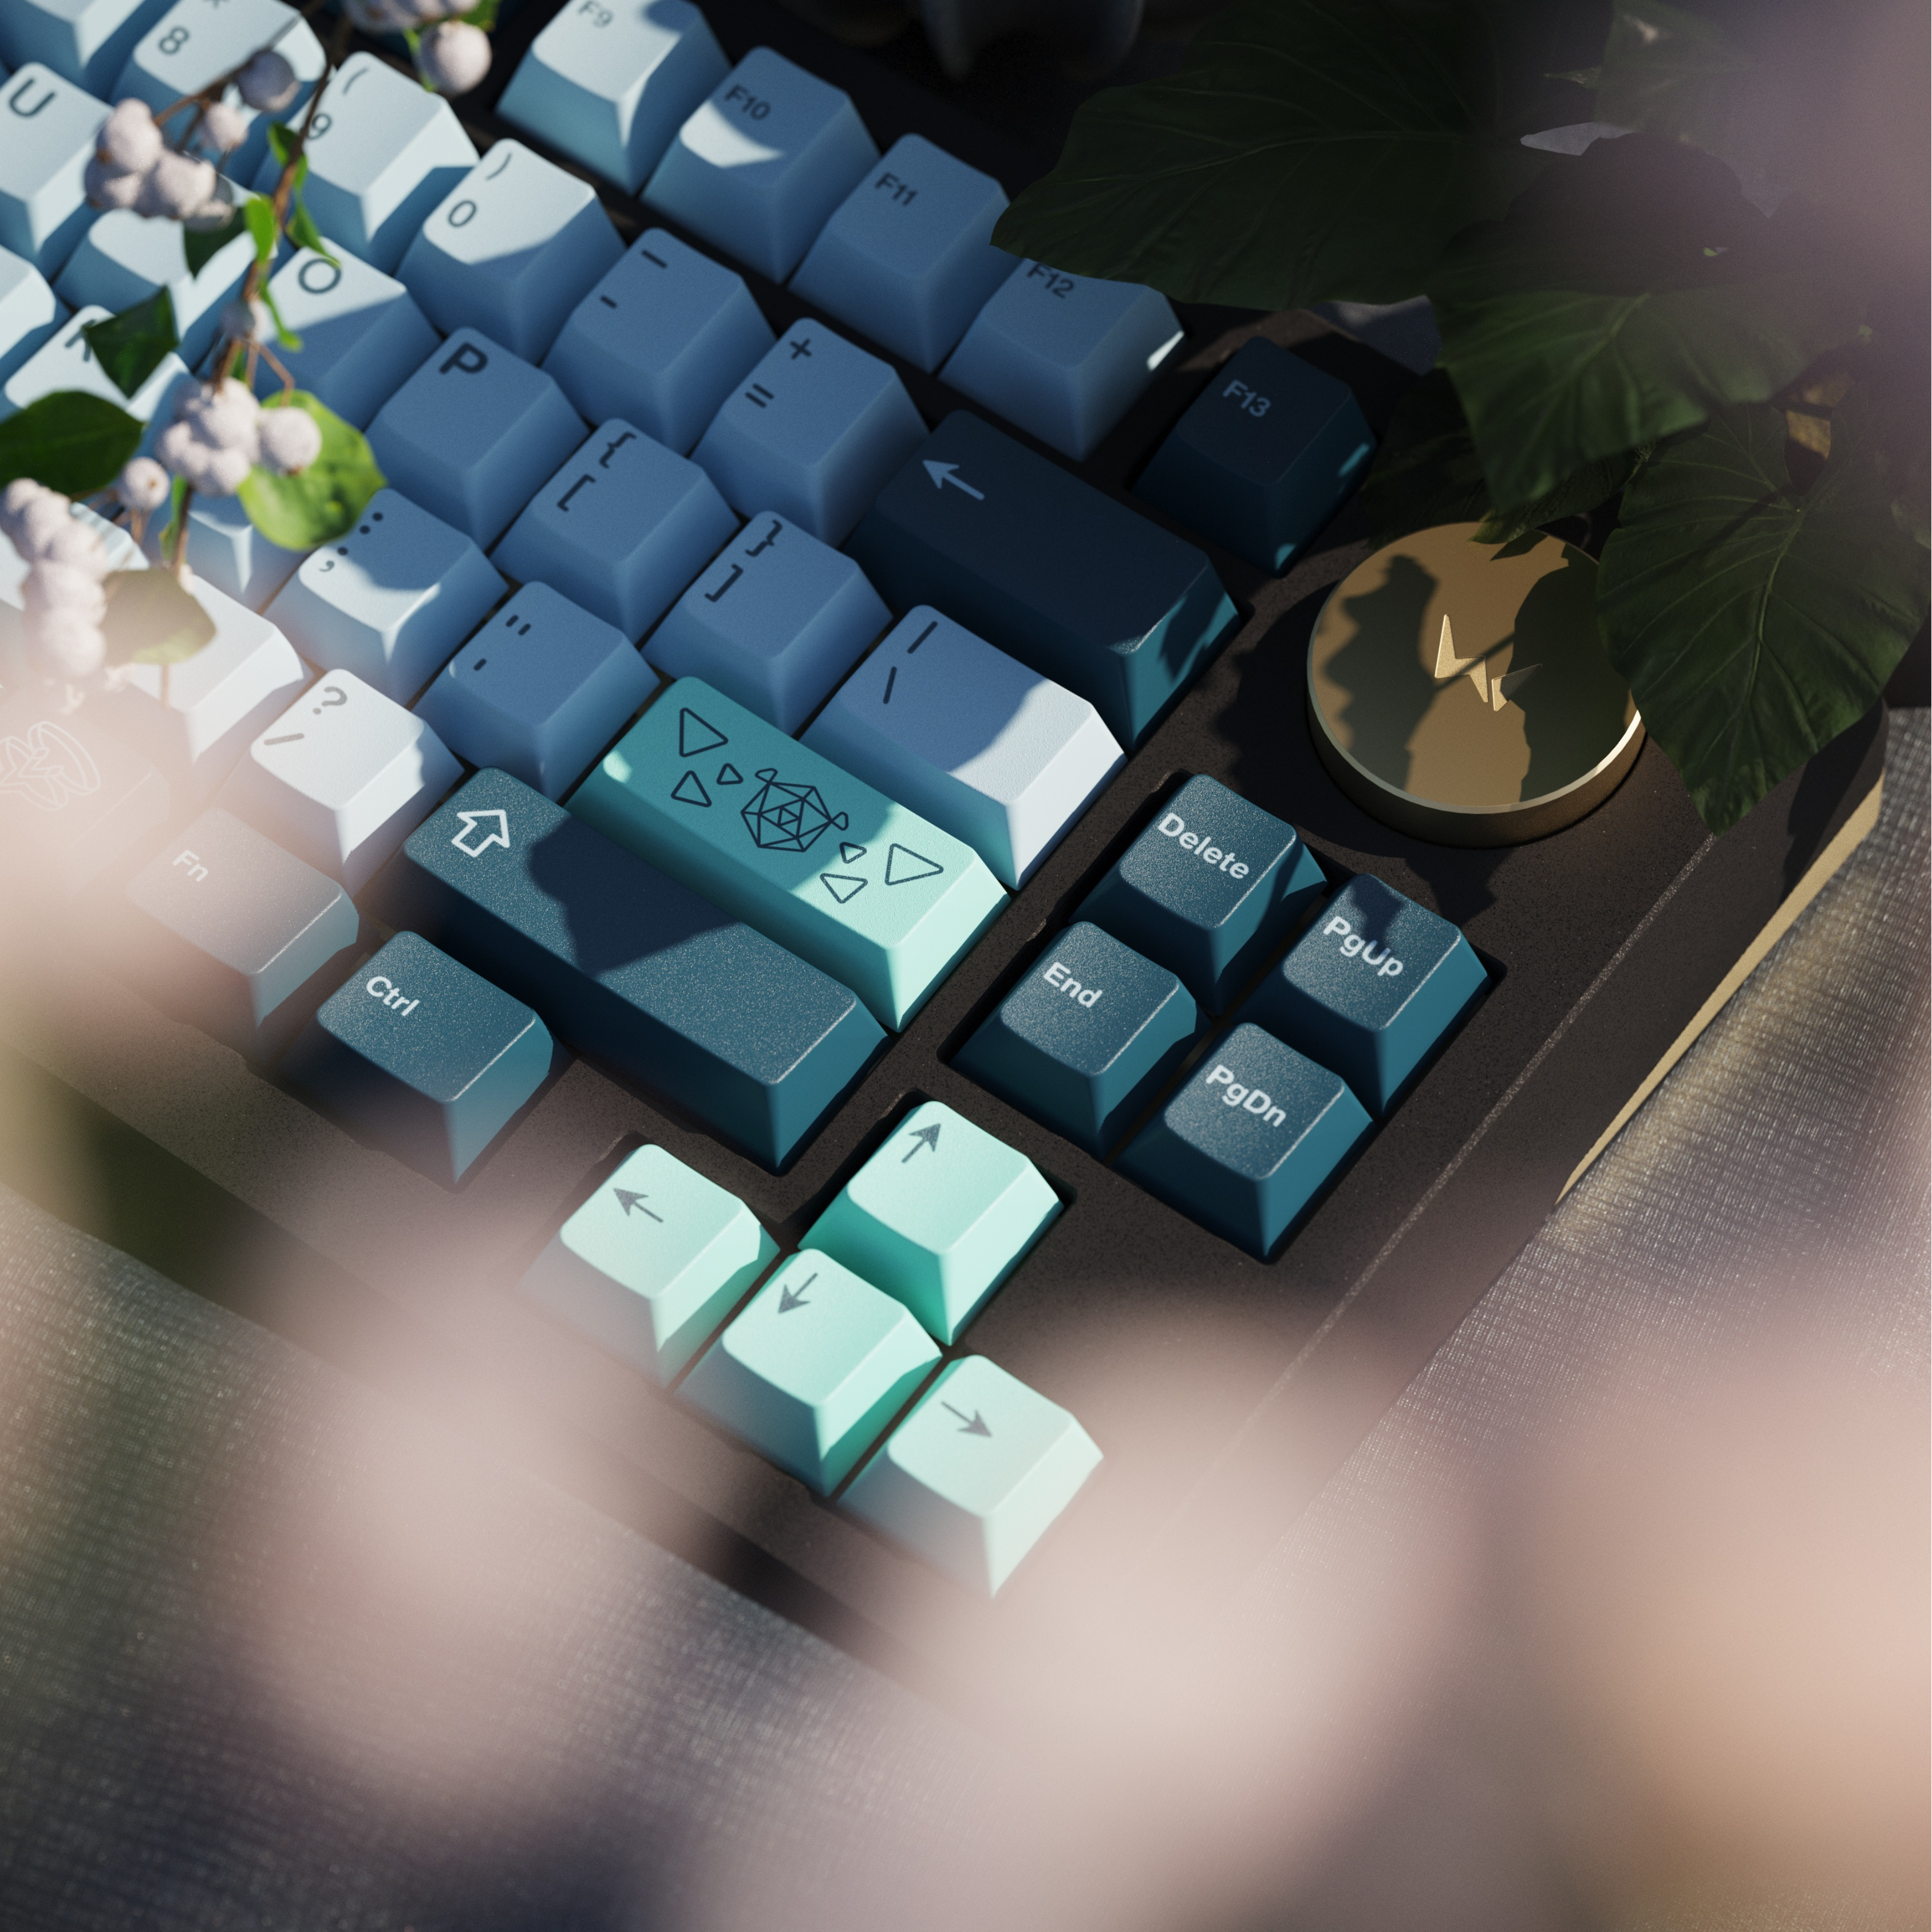 [Pre-order] WS Entwined Flowers Keycap Set